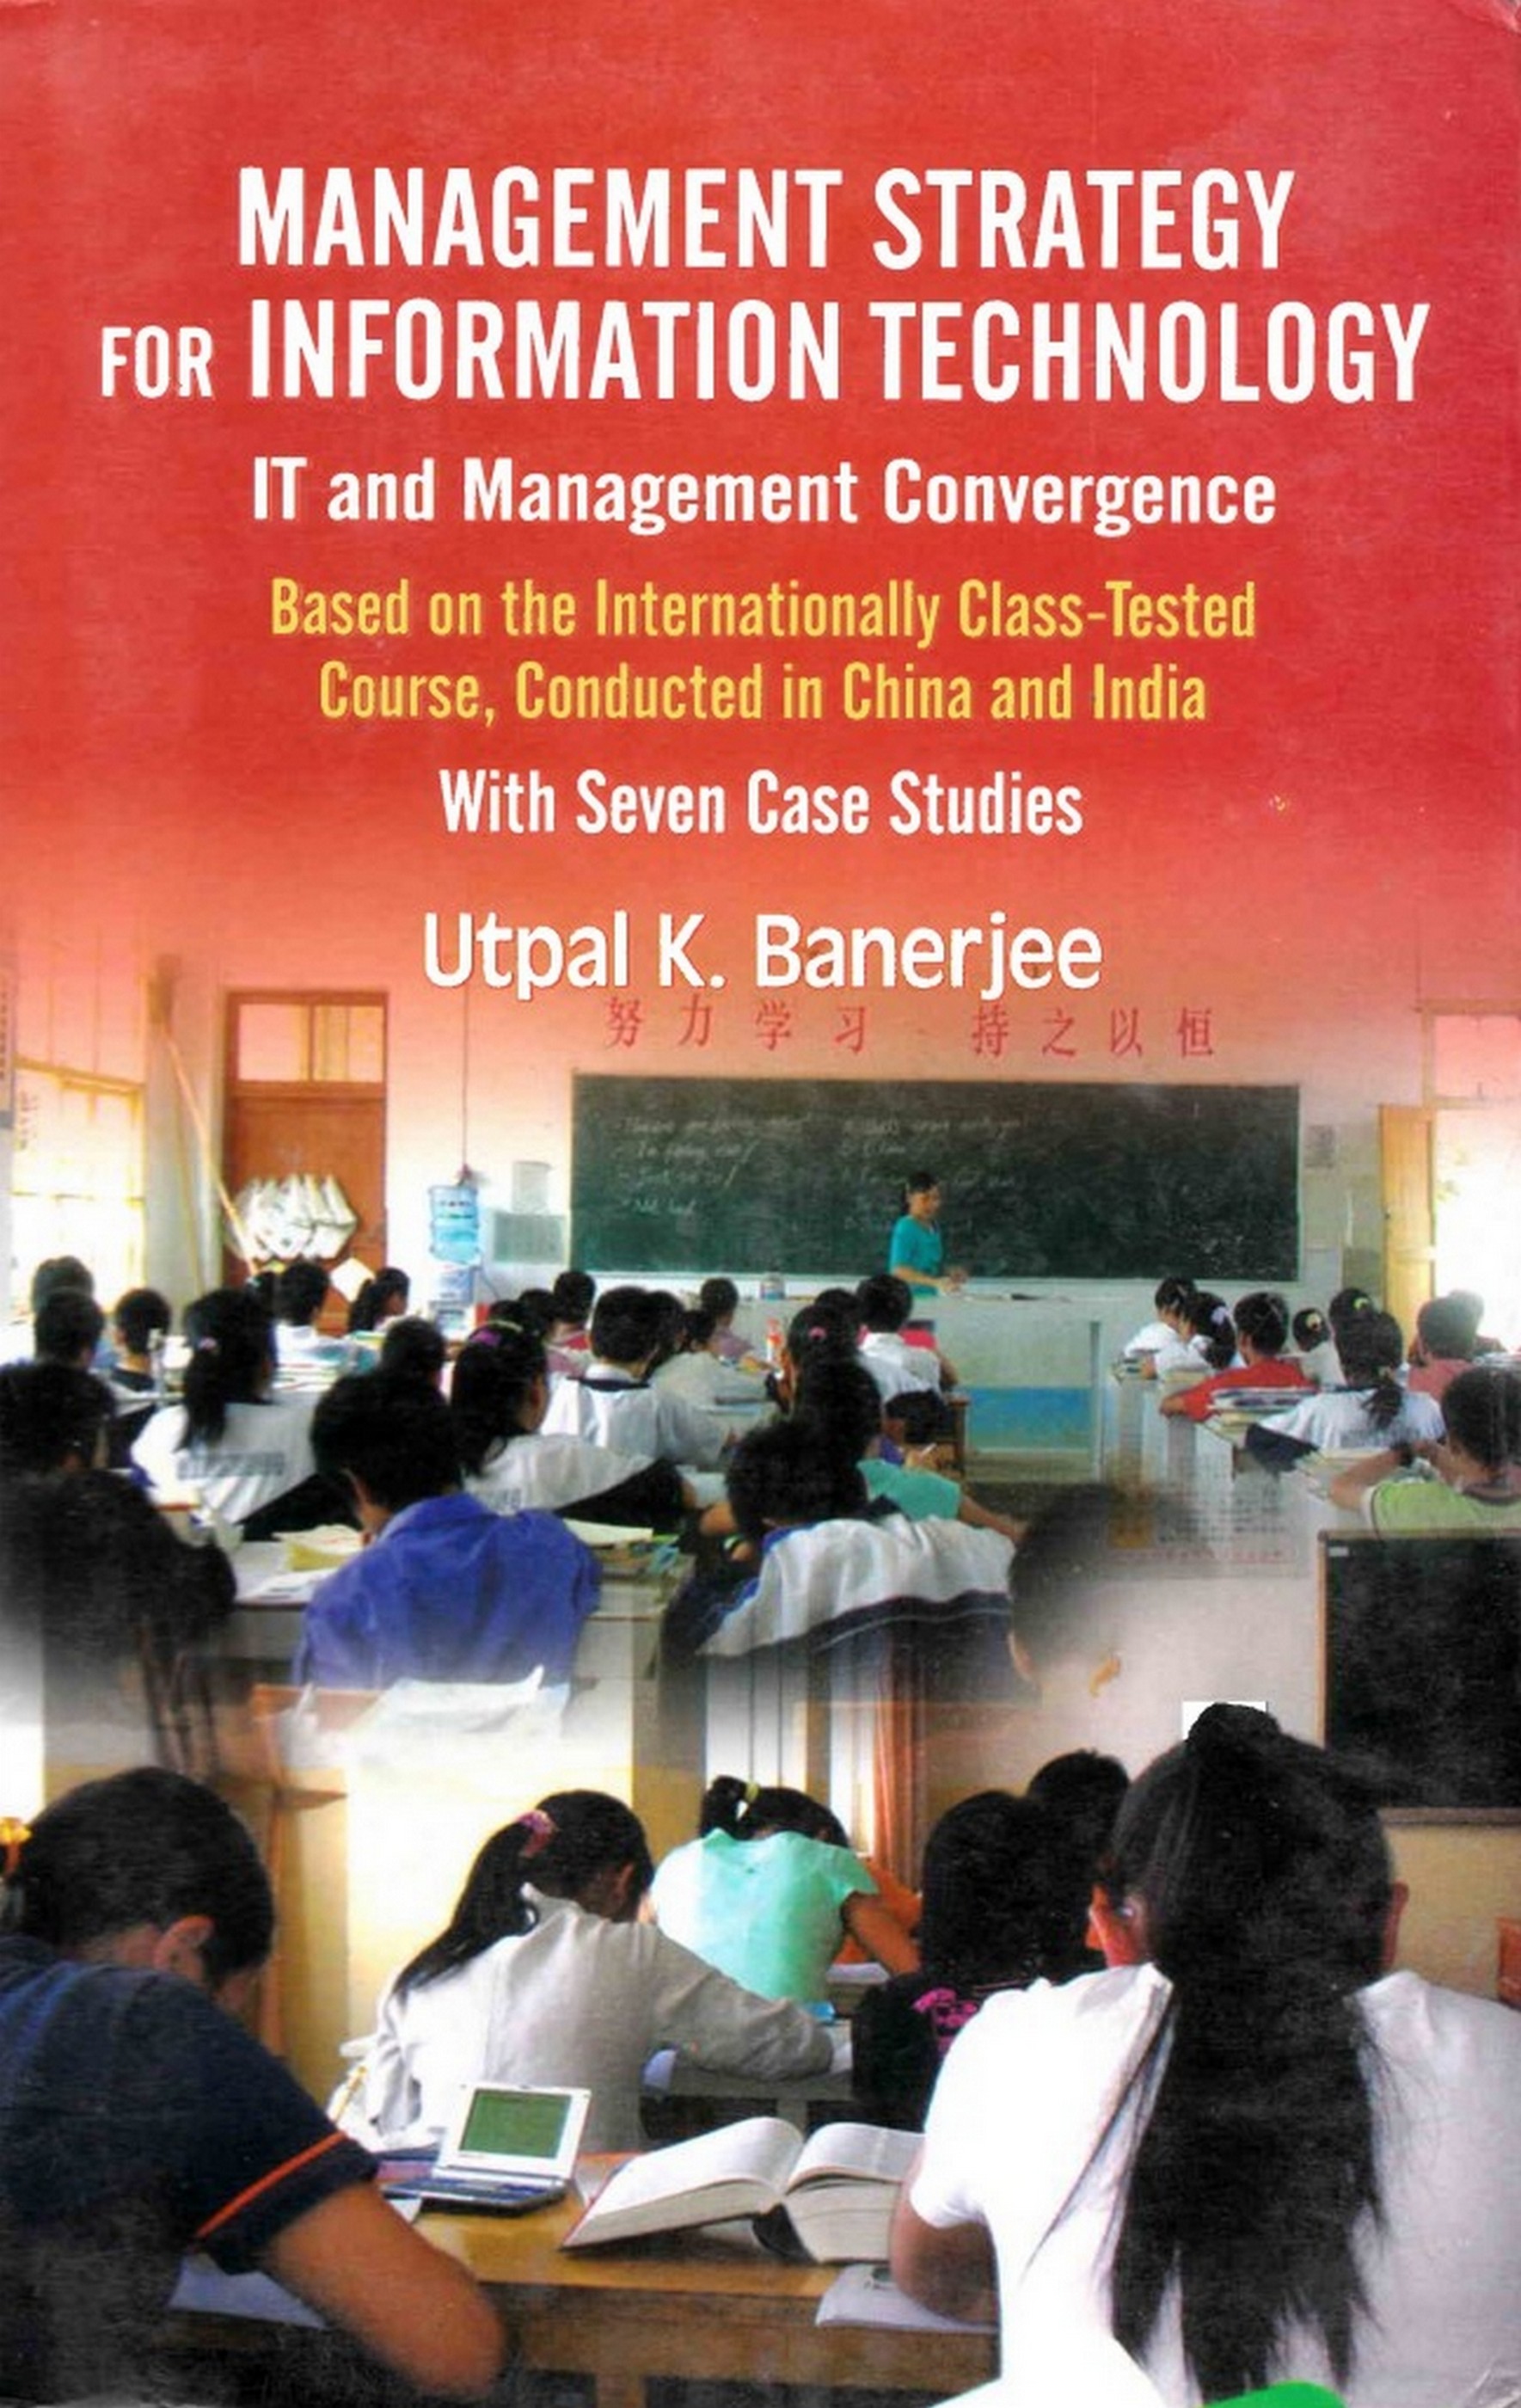 Management Strategy for Information Technology (IT and Management Convergence)